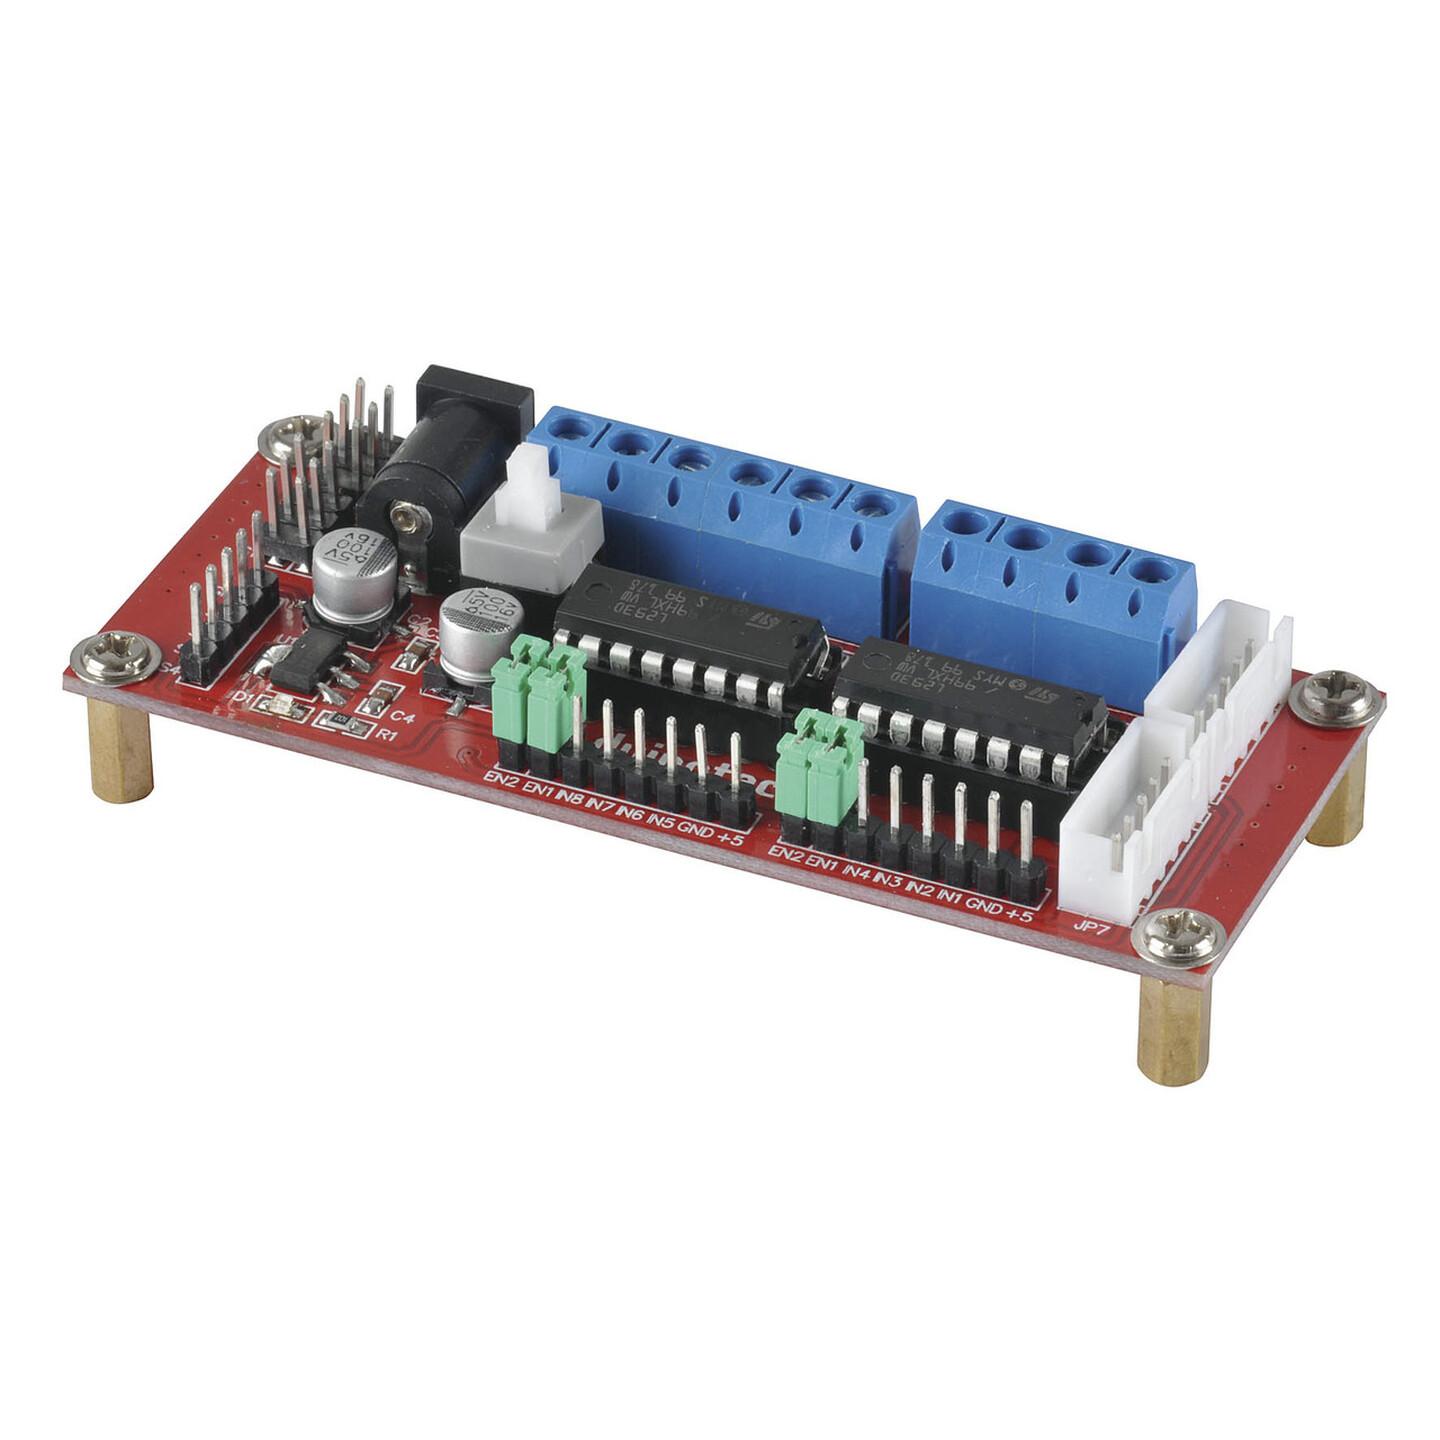 4WD DC Power Supply Motor Driver Module for Arduino